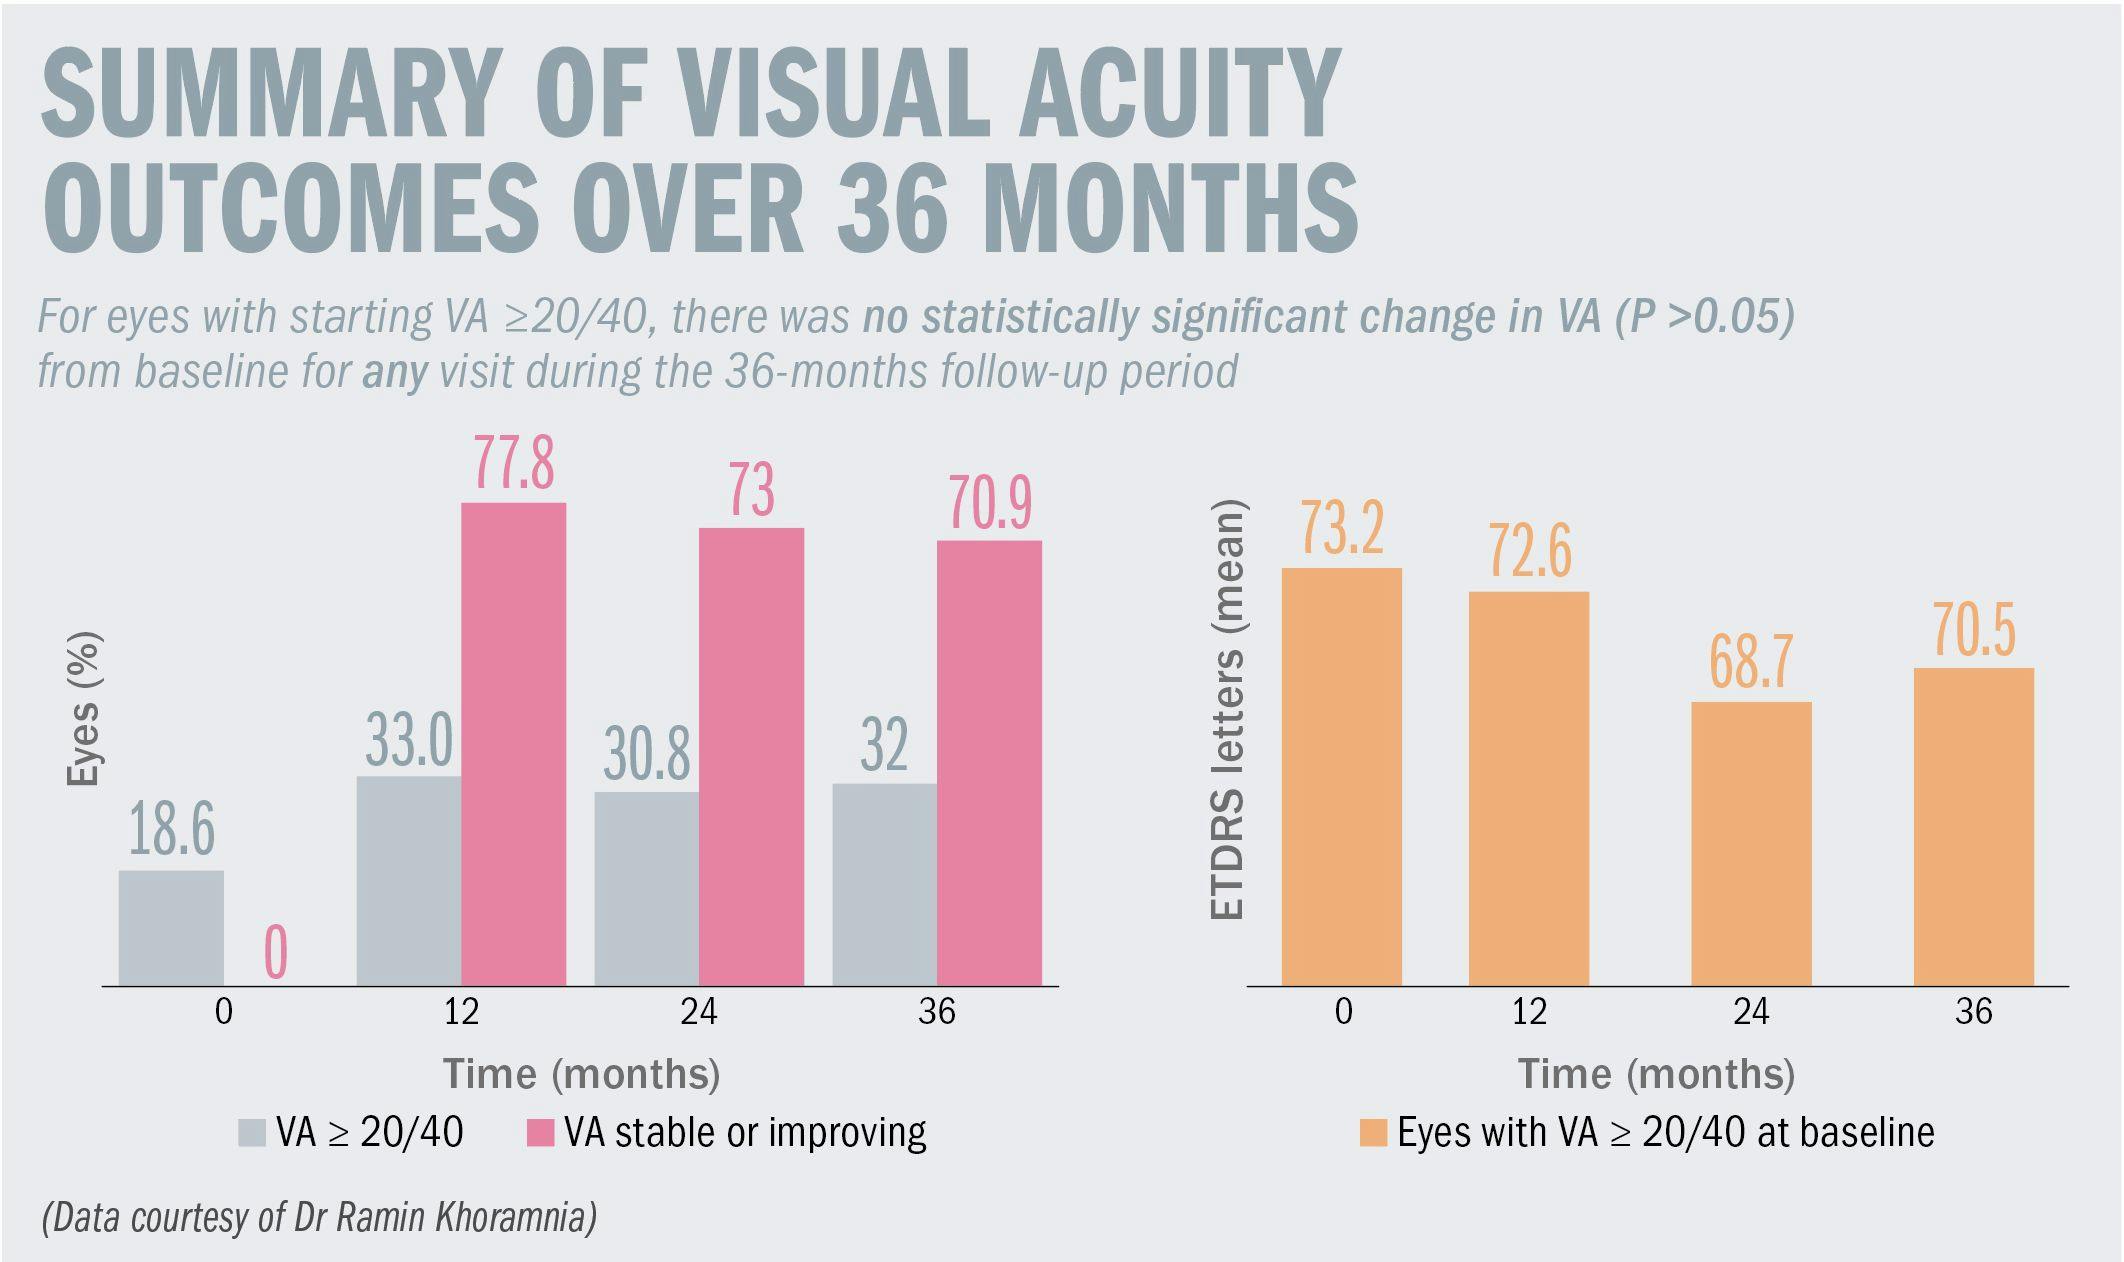 graph of visual acuity outcomes over 36 months